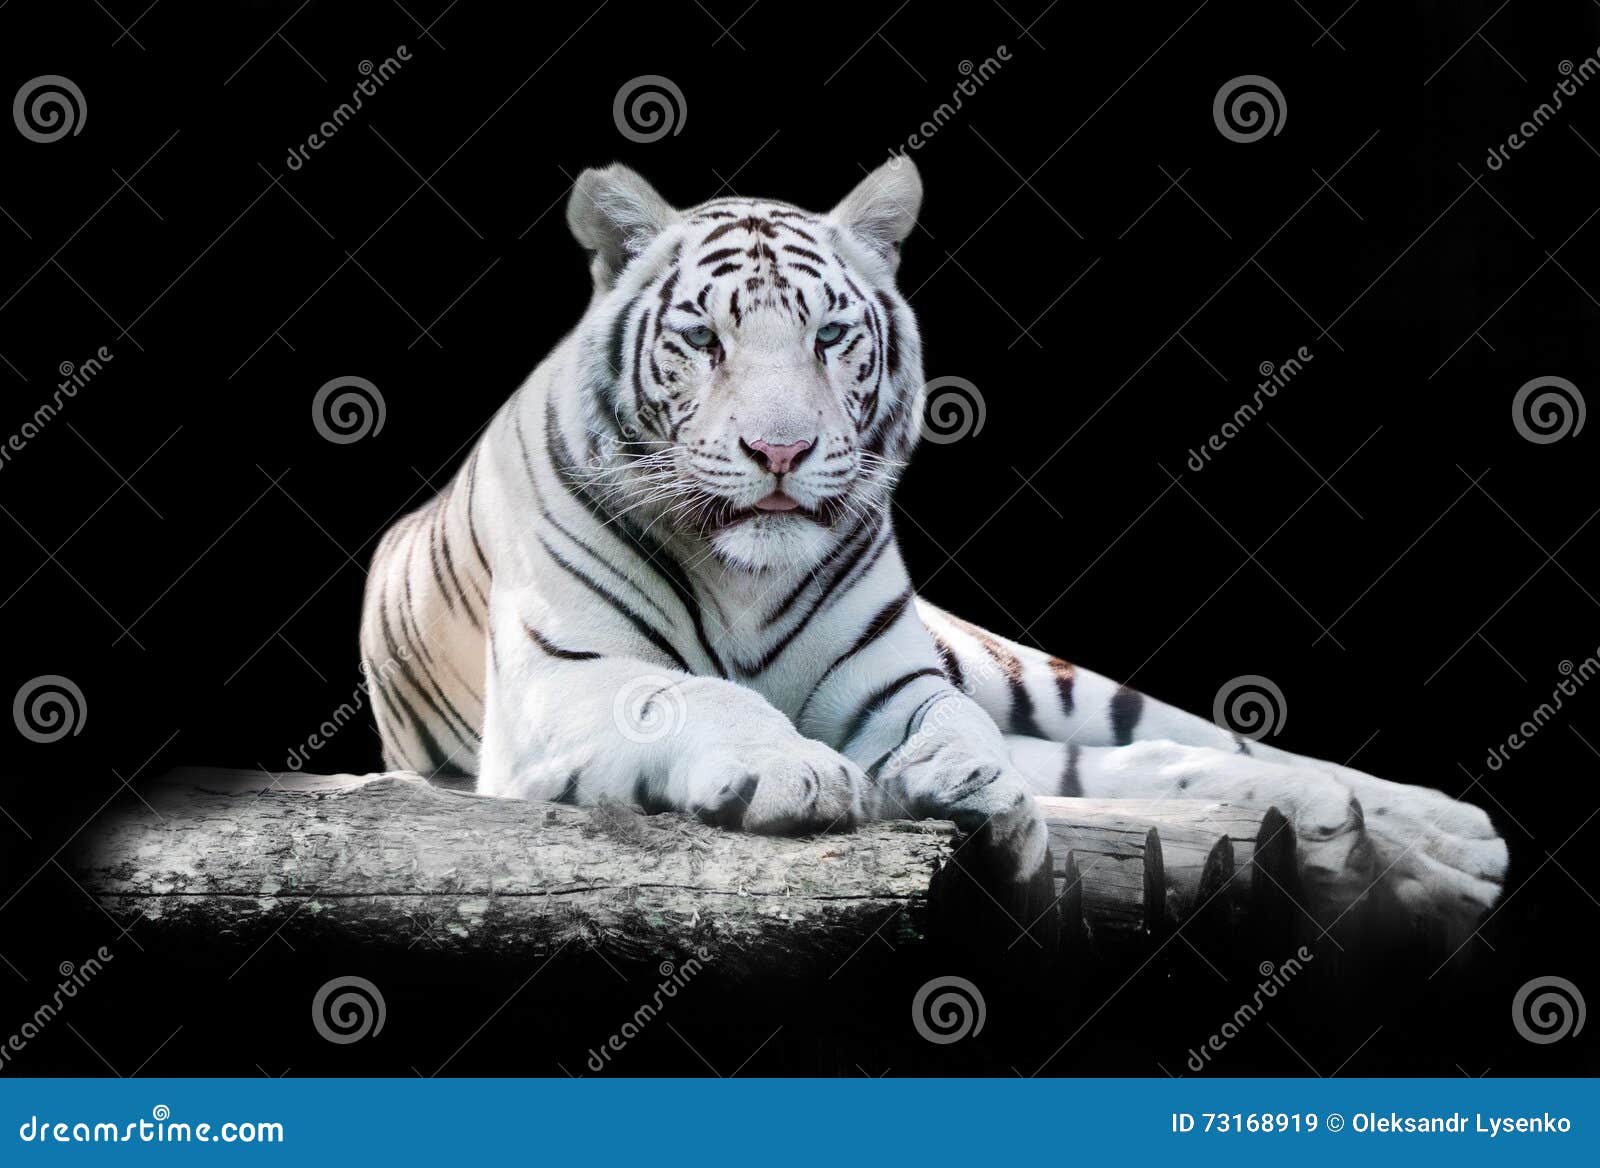 white the bengal tiger